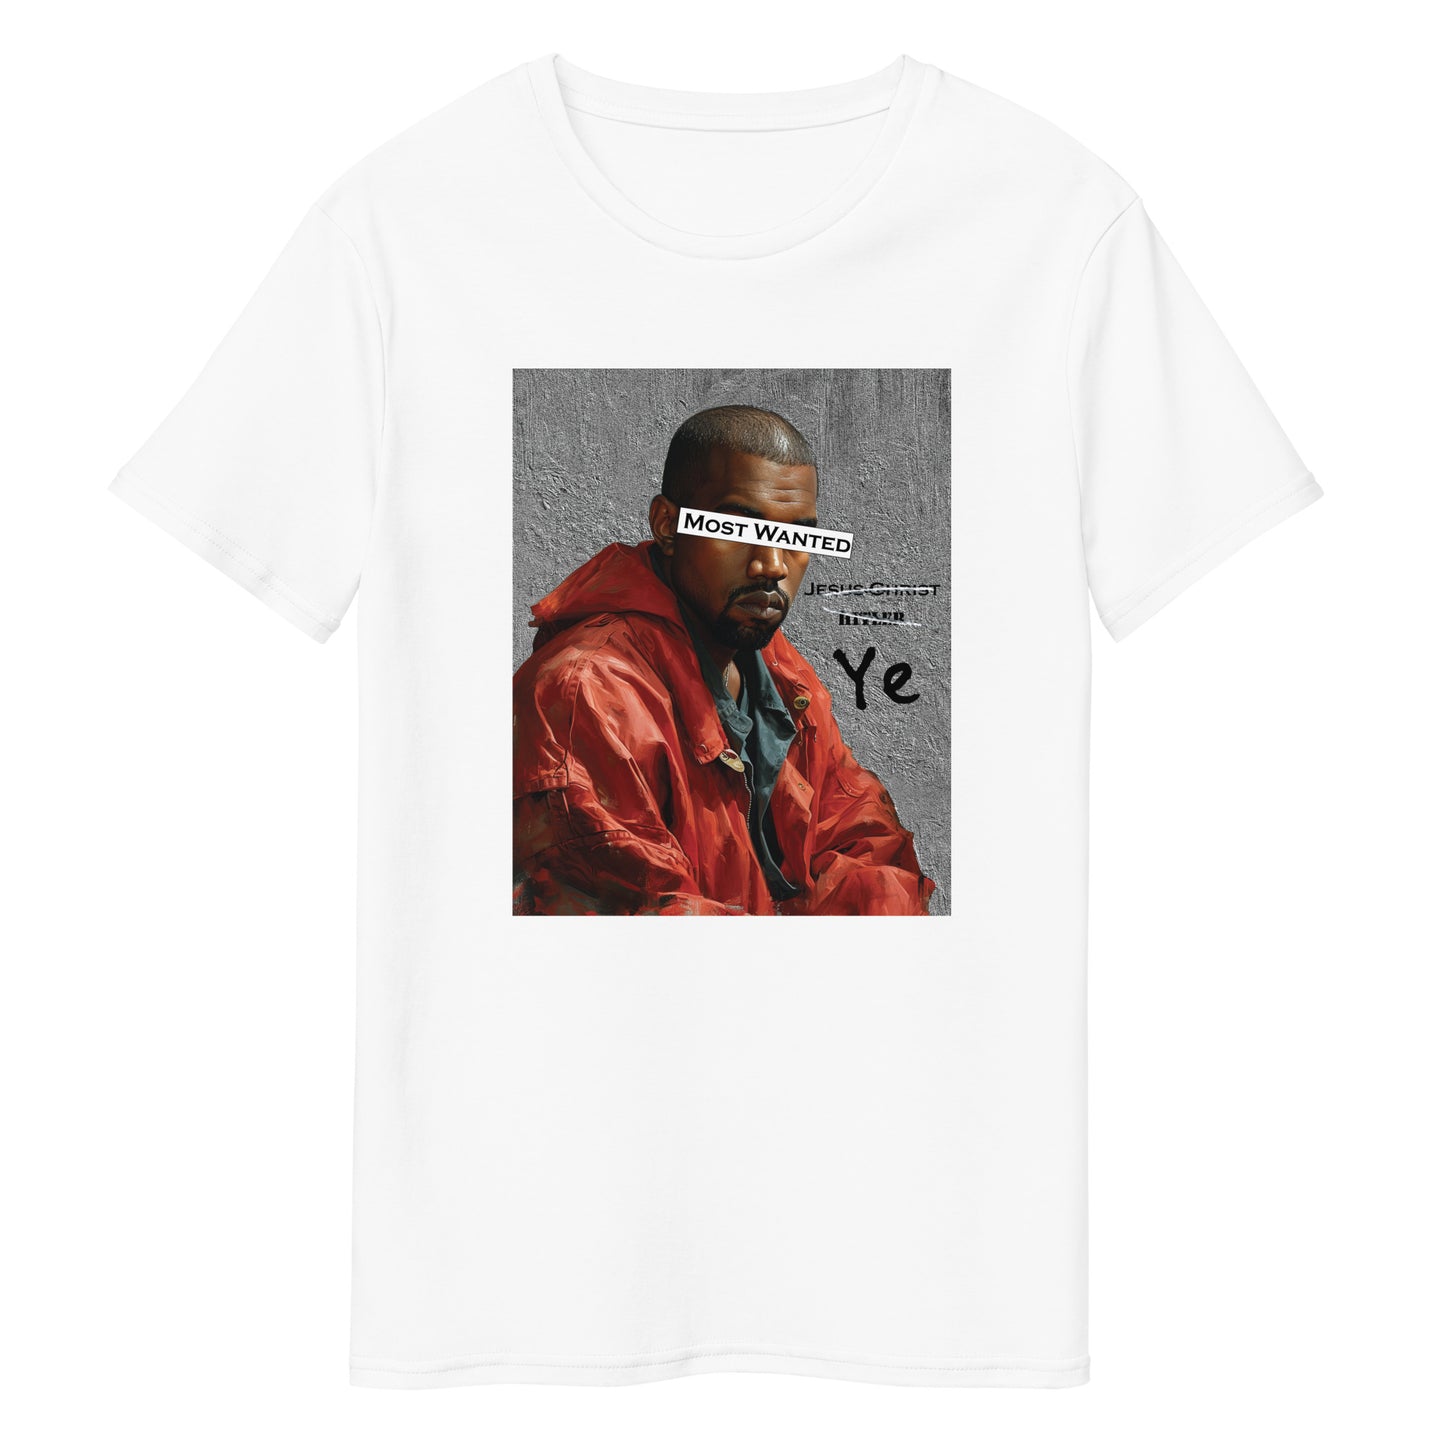 Jesus Christ, Hitler , Ye…. (3rd Party) Most Wanted Graphic Tee